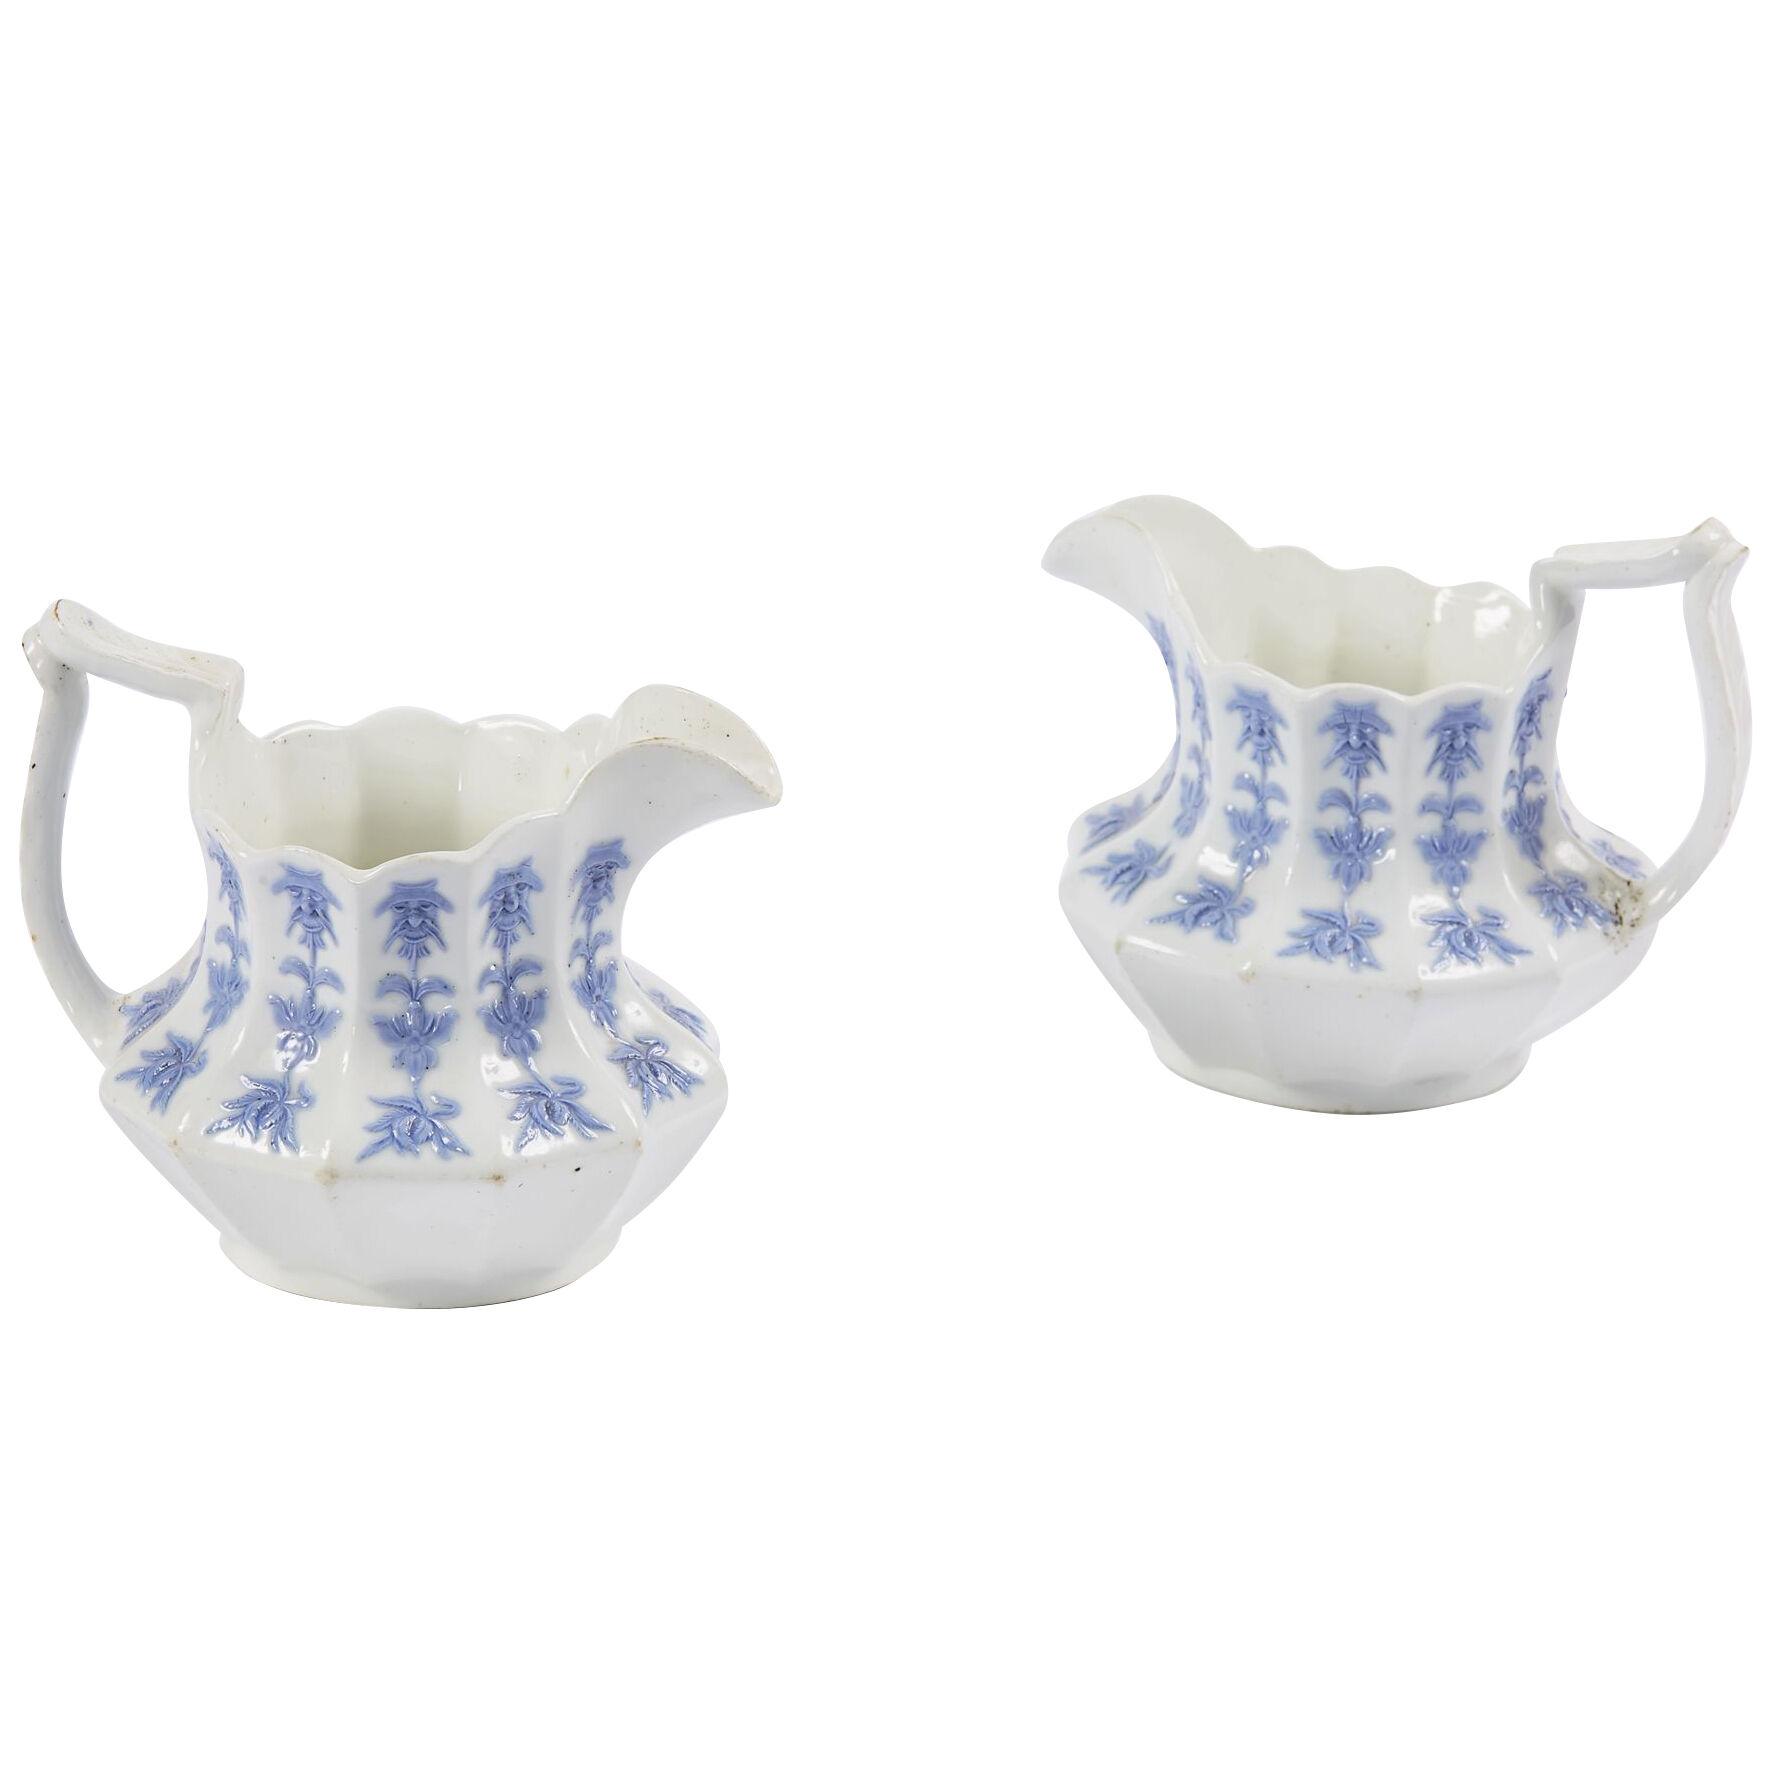 19th Century German Pair of Porcelain Blue and White Jugs